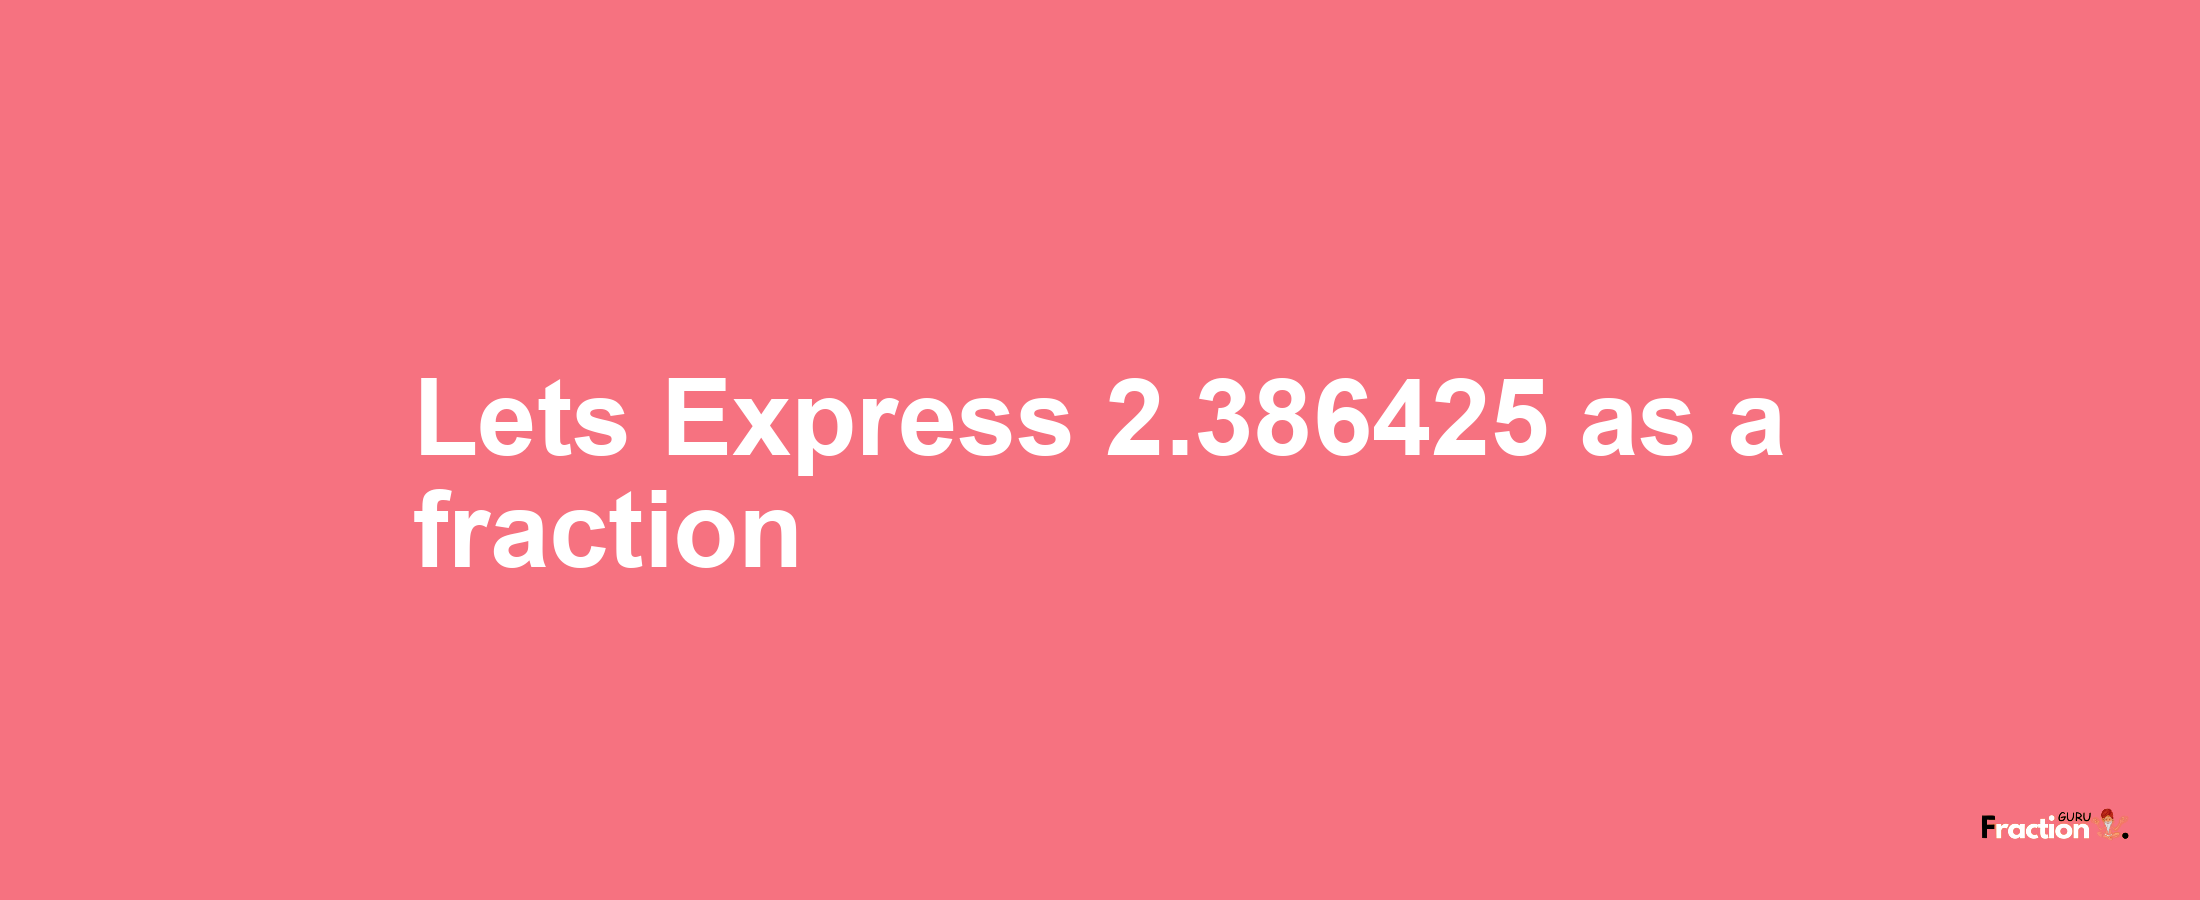 Lets Express 2.386425 as afraction